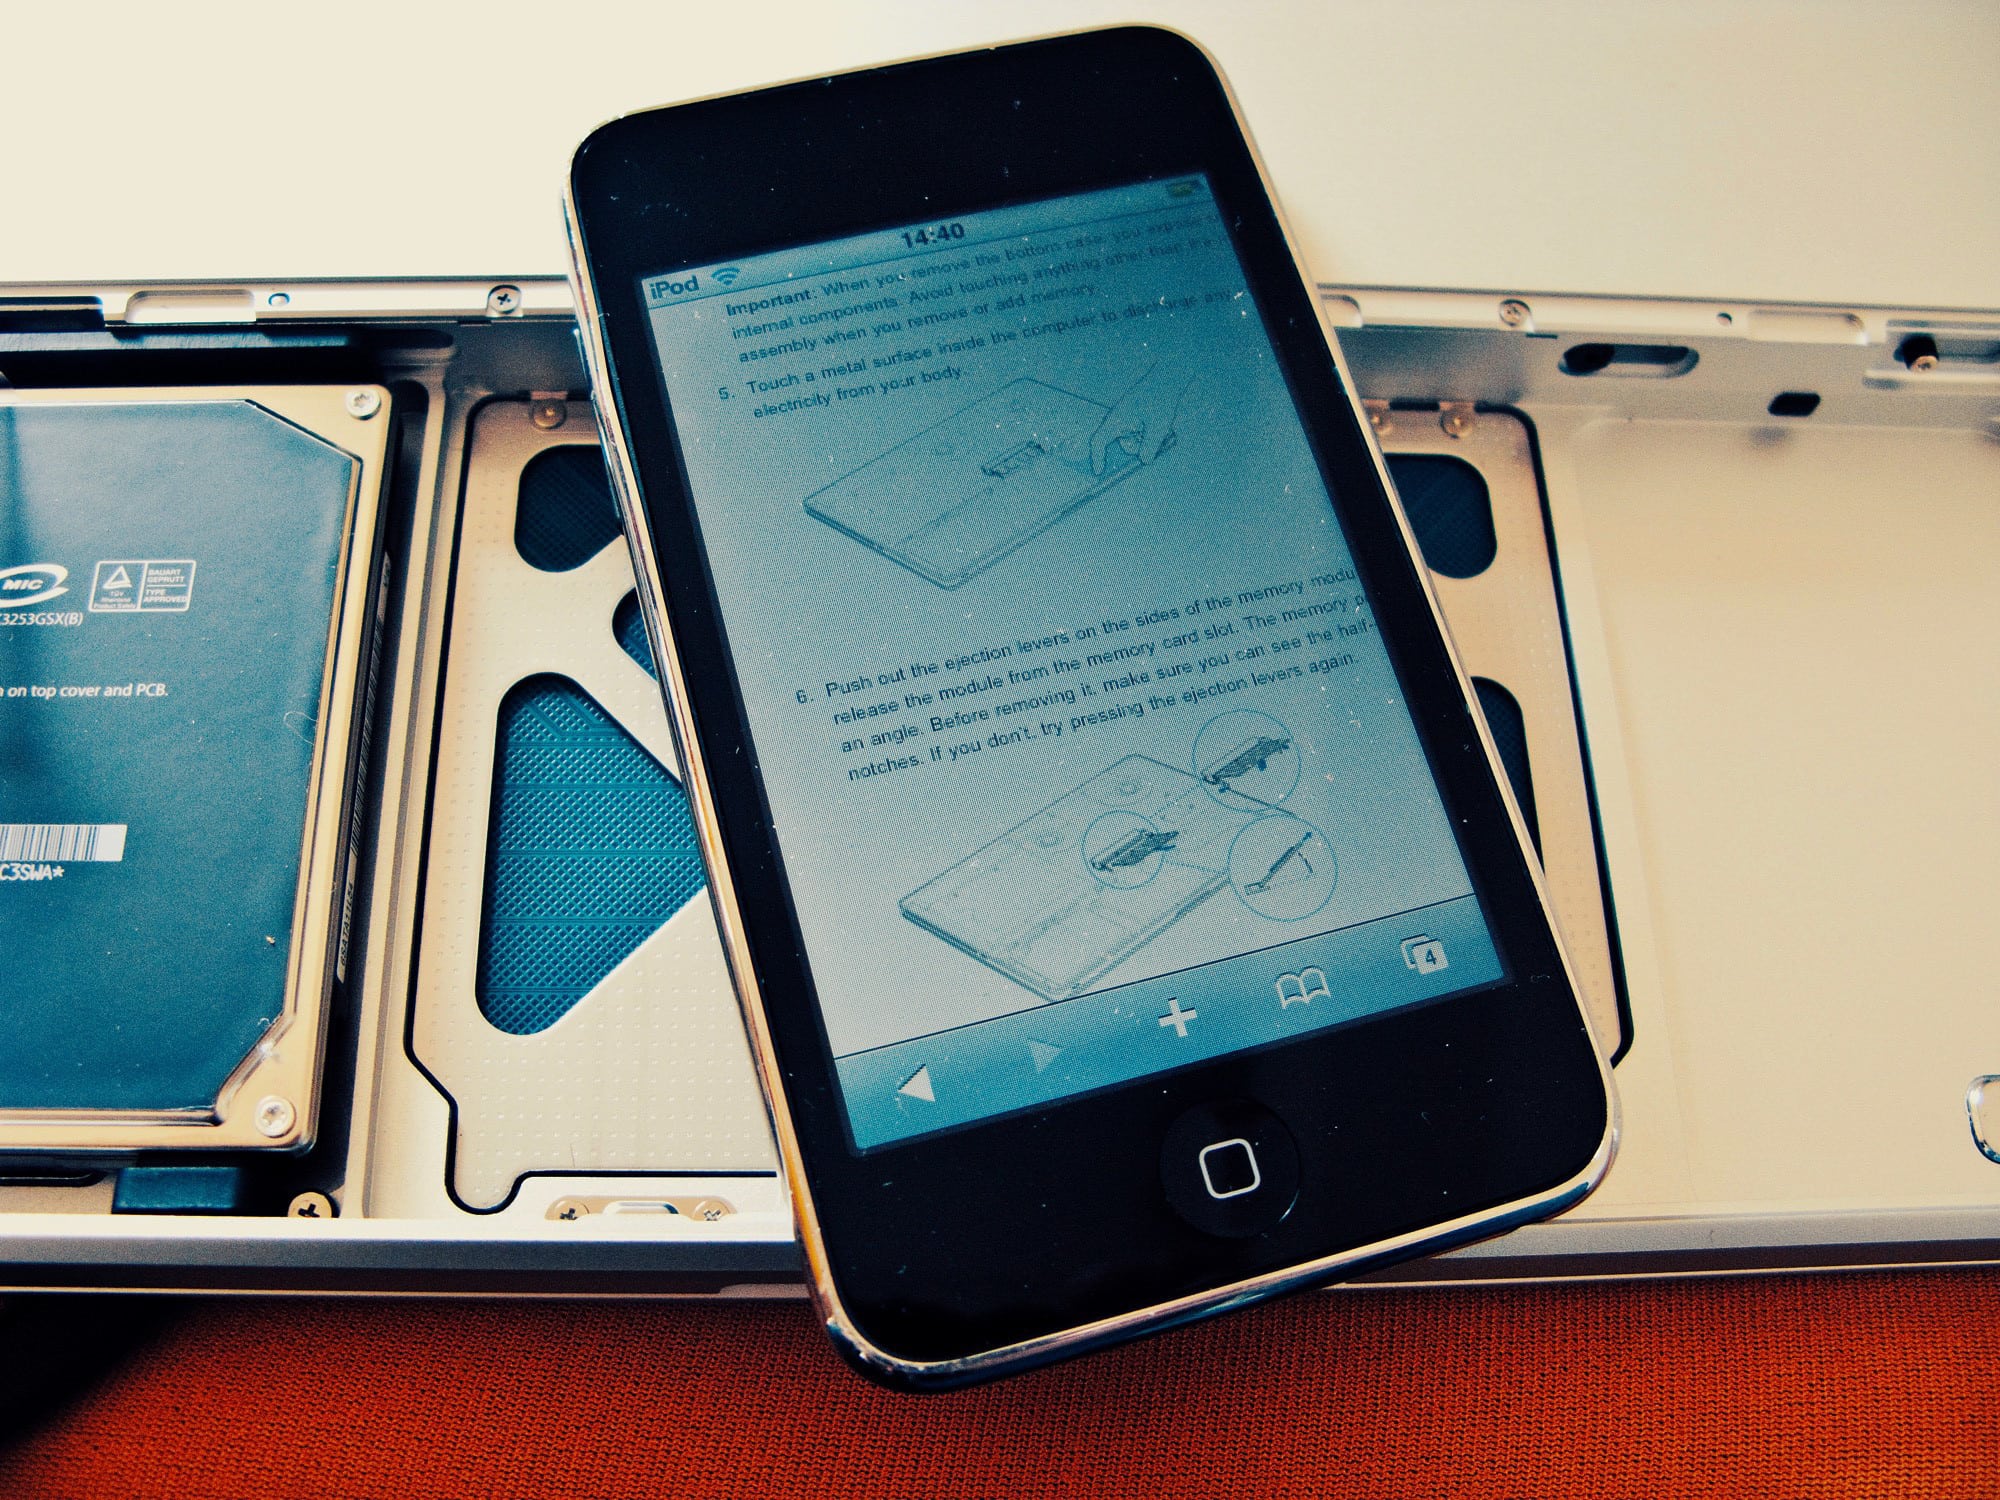 It's a repair manual! The iPod touch can be anything.